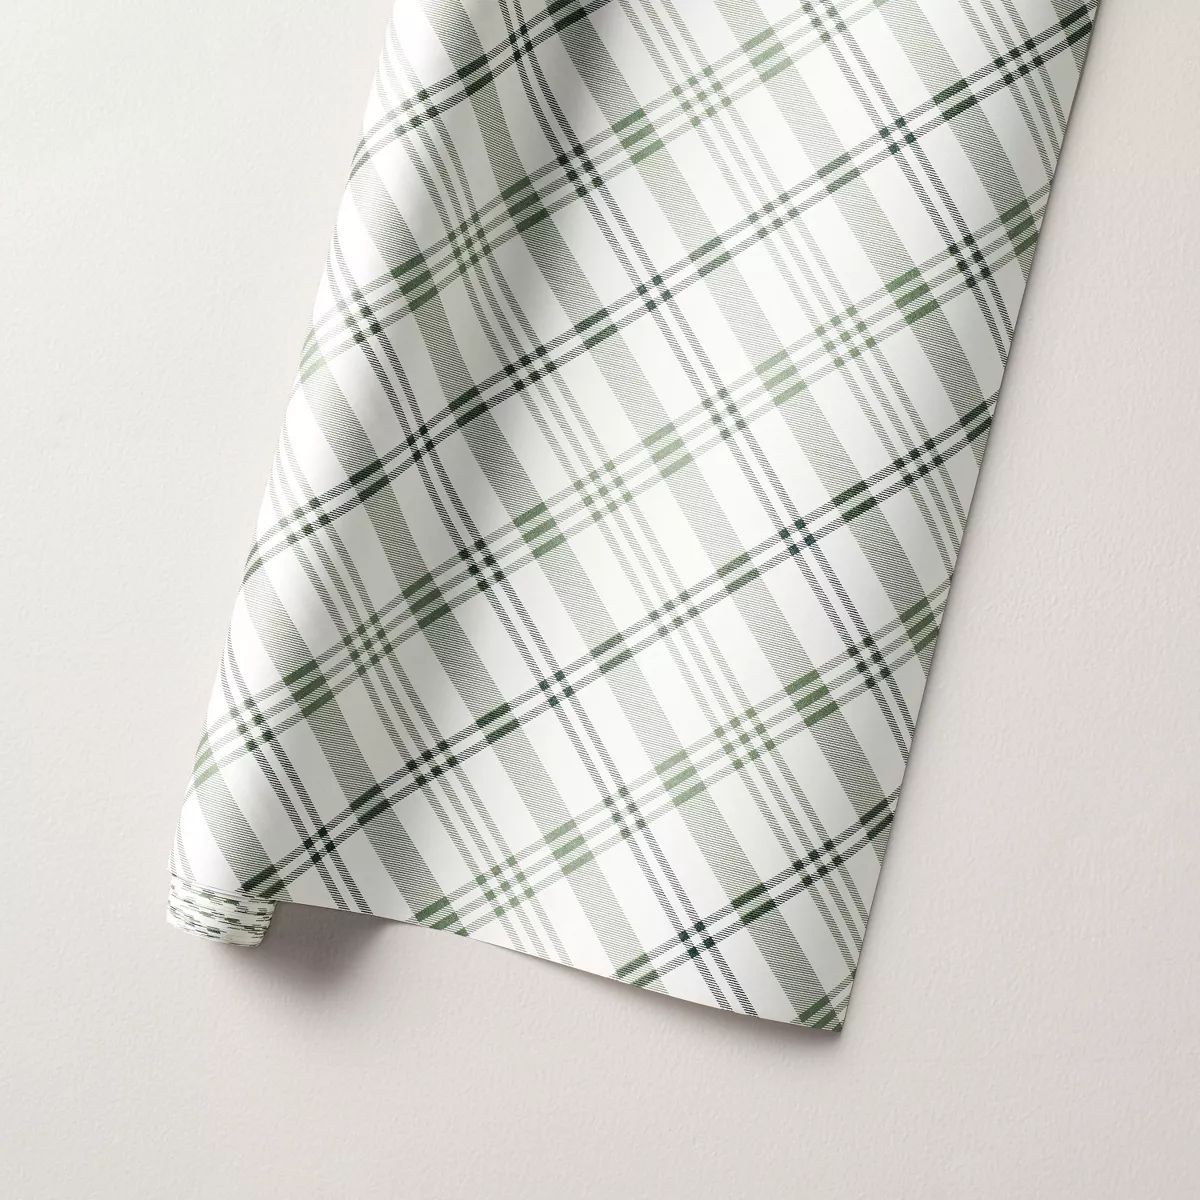 30 sq ft Plaid Christmas Gift Wrap Green/Cream - Hearth & Hand™ with Magnolia | Target